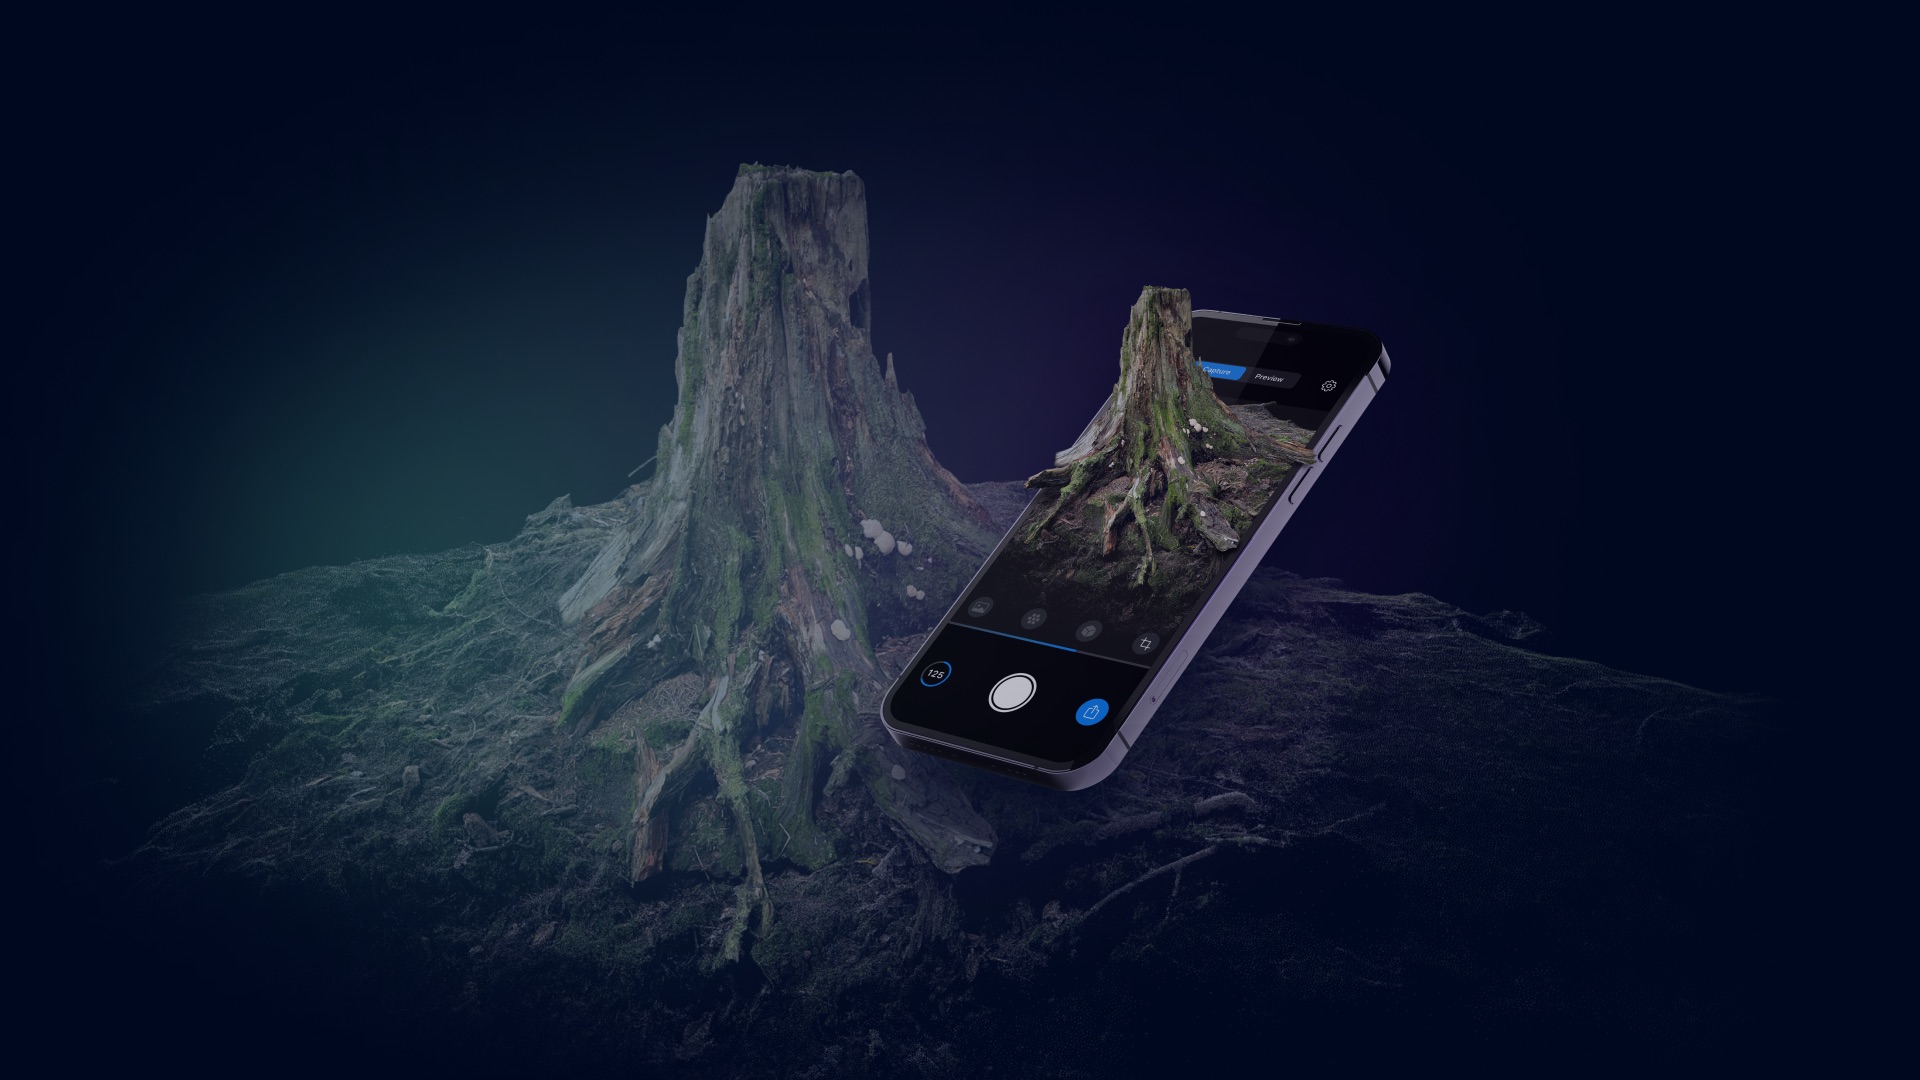 3D scanning RealityScan now available on the App Store